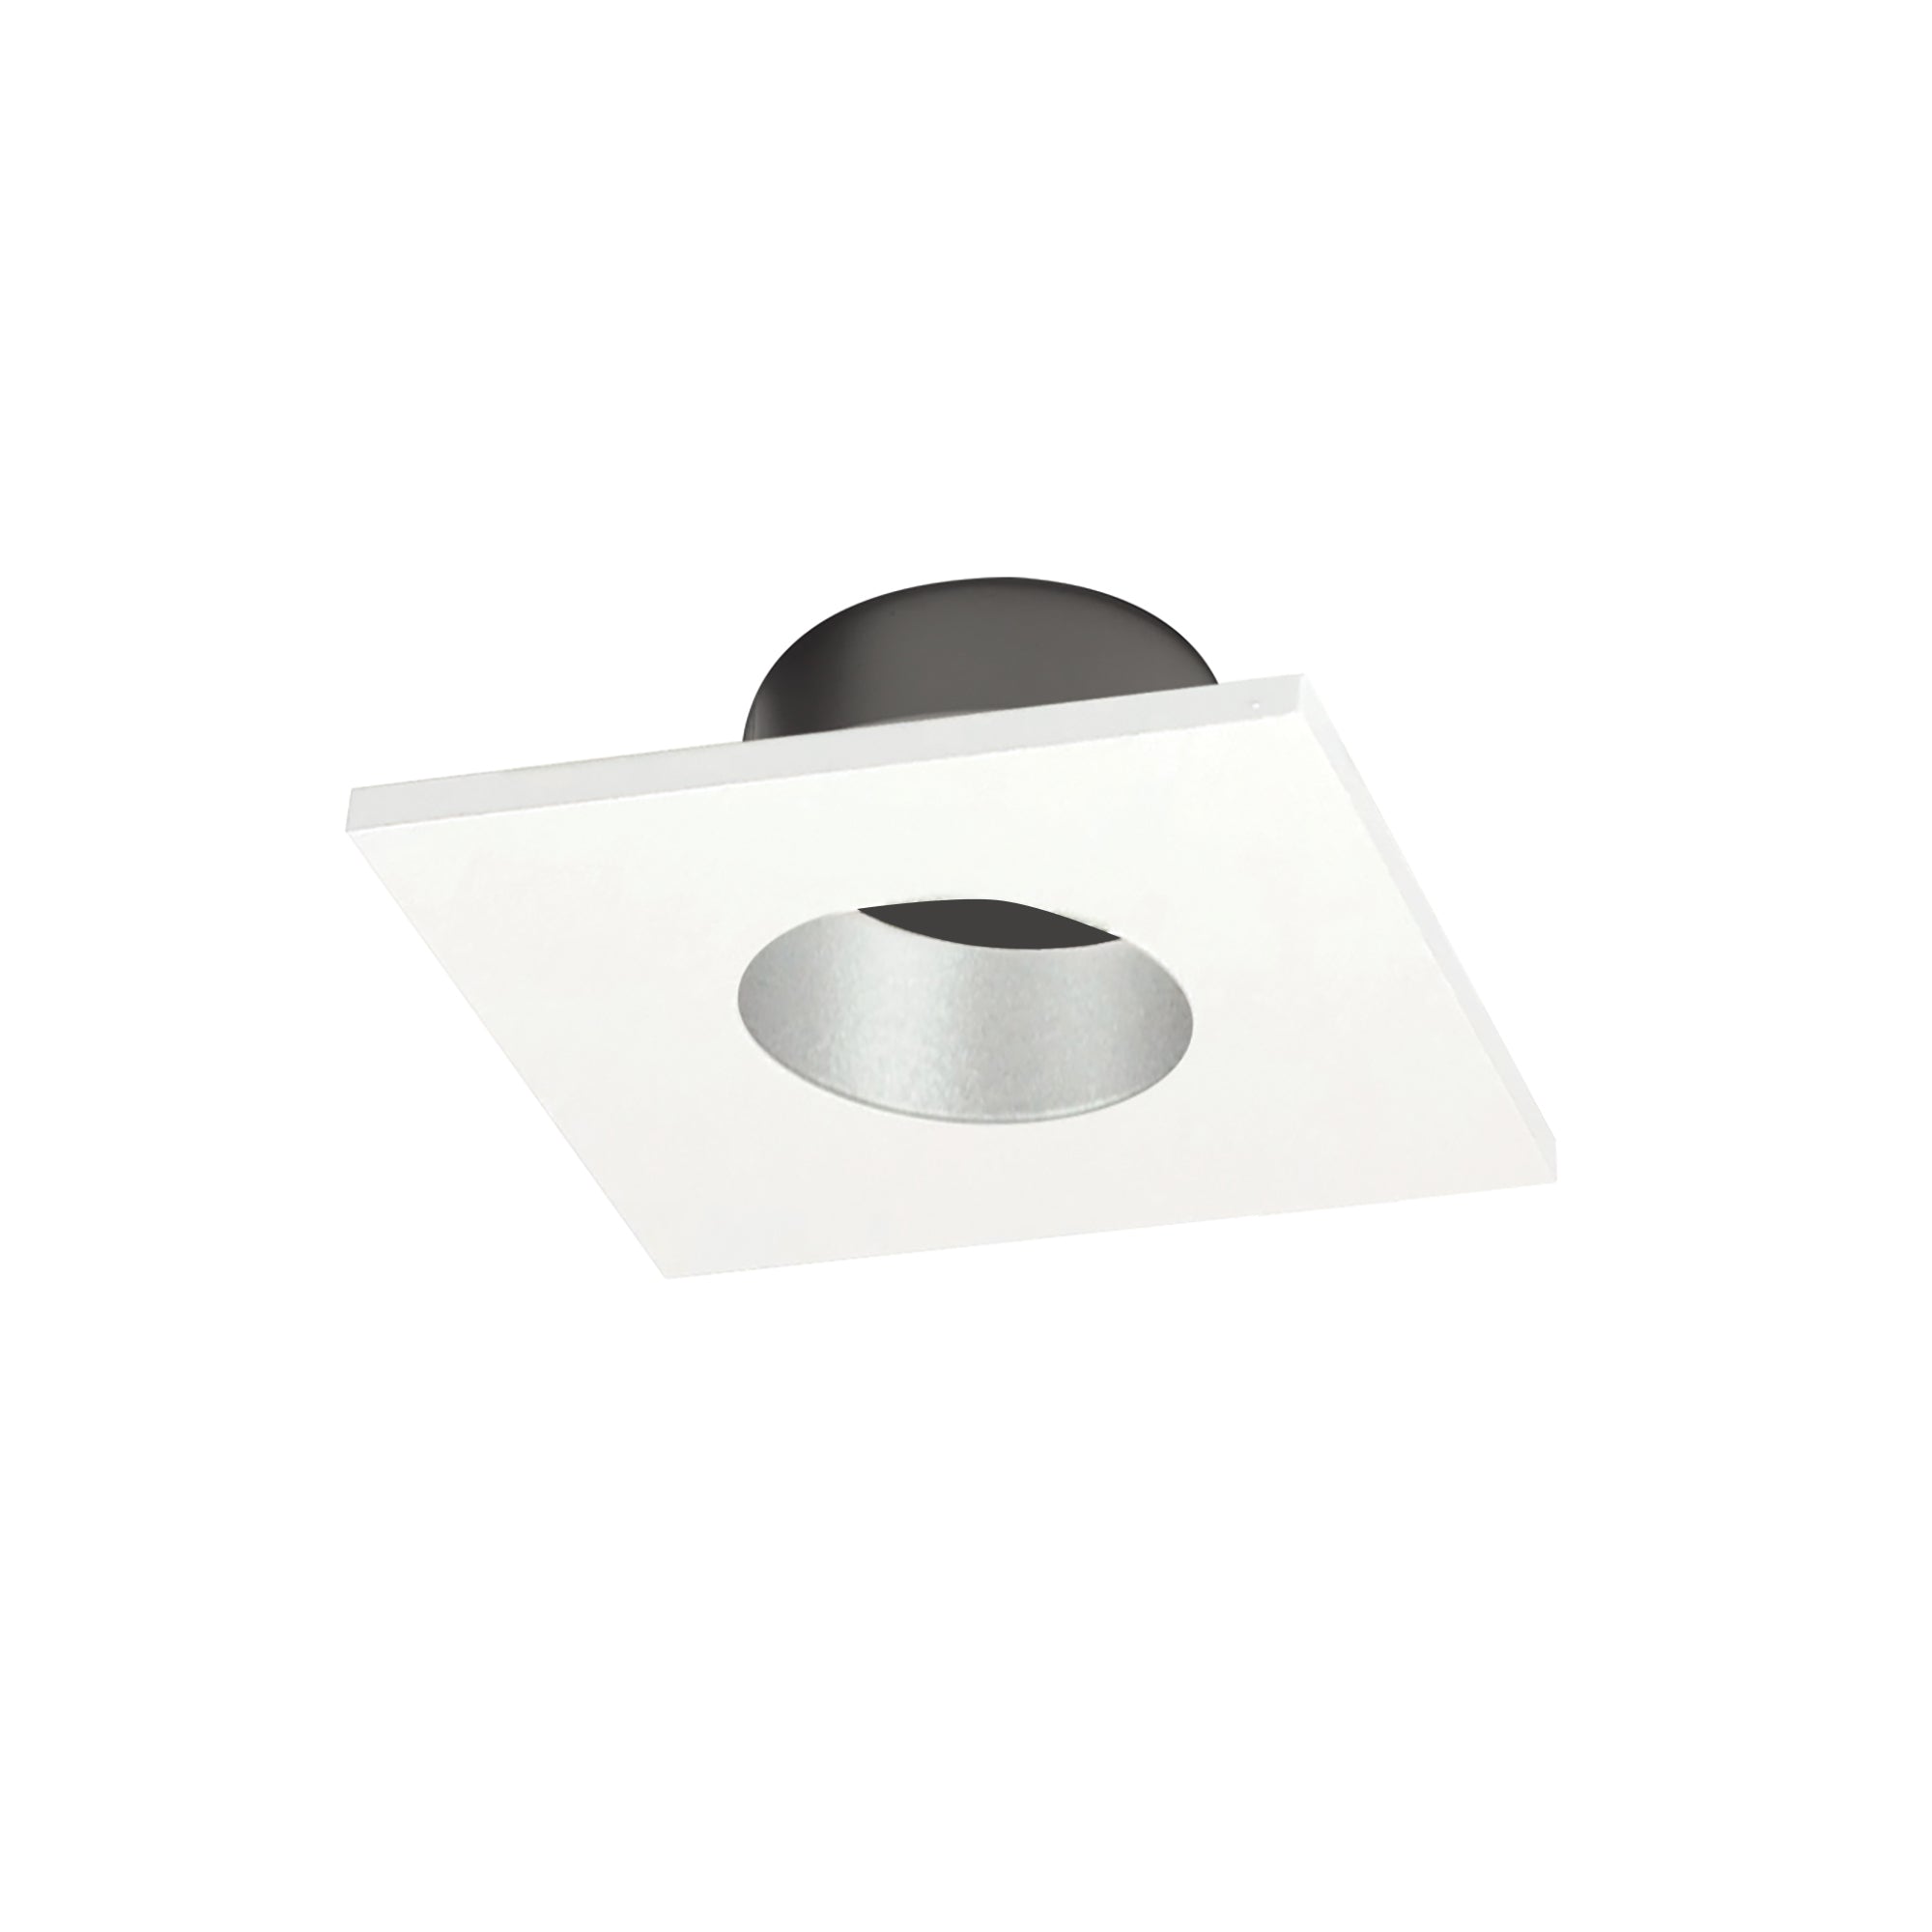 Nora Lighting NIOC-1SNGHW - Recessed - 1 Inch Iolite Can-less Square Downlight Trim, Haze Reflector / White Flange